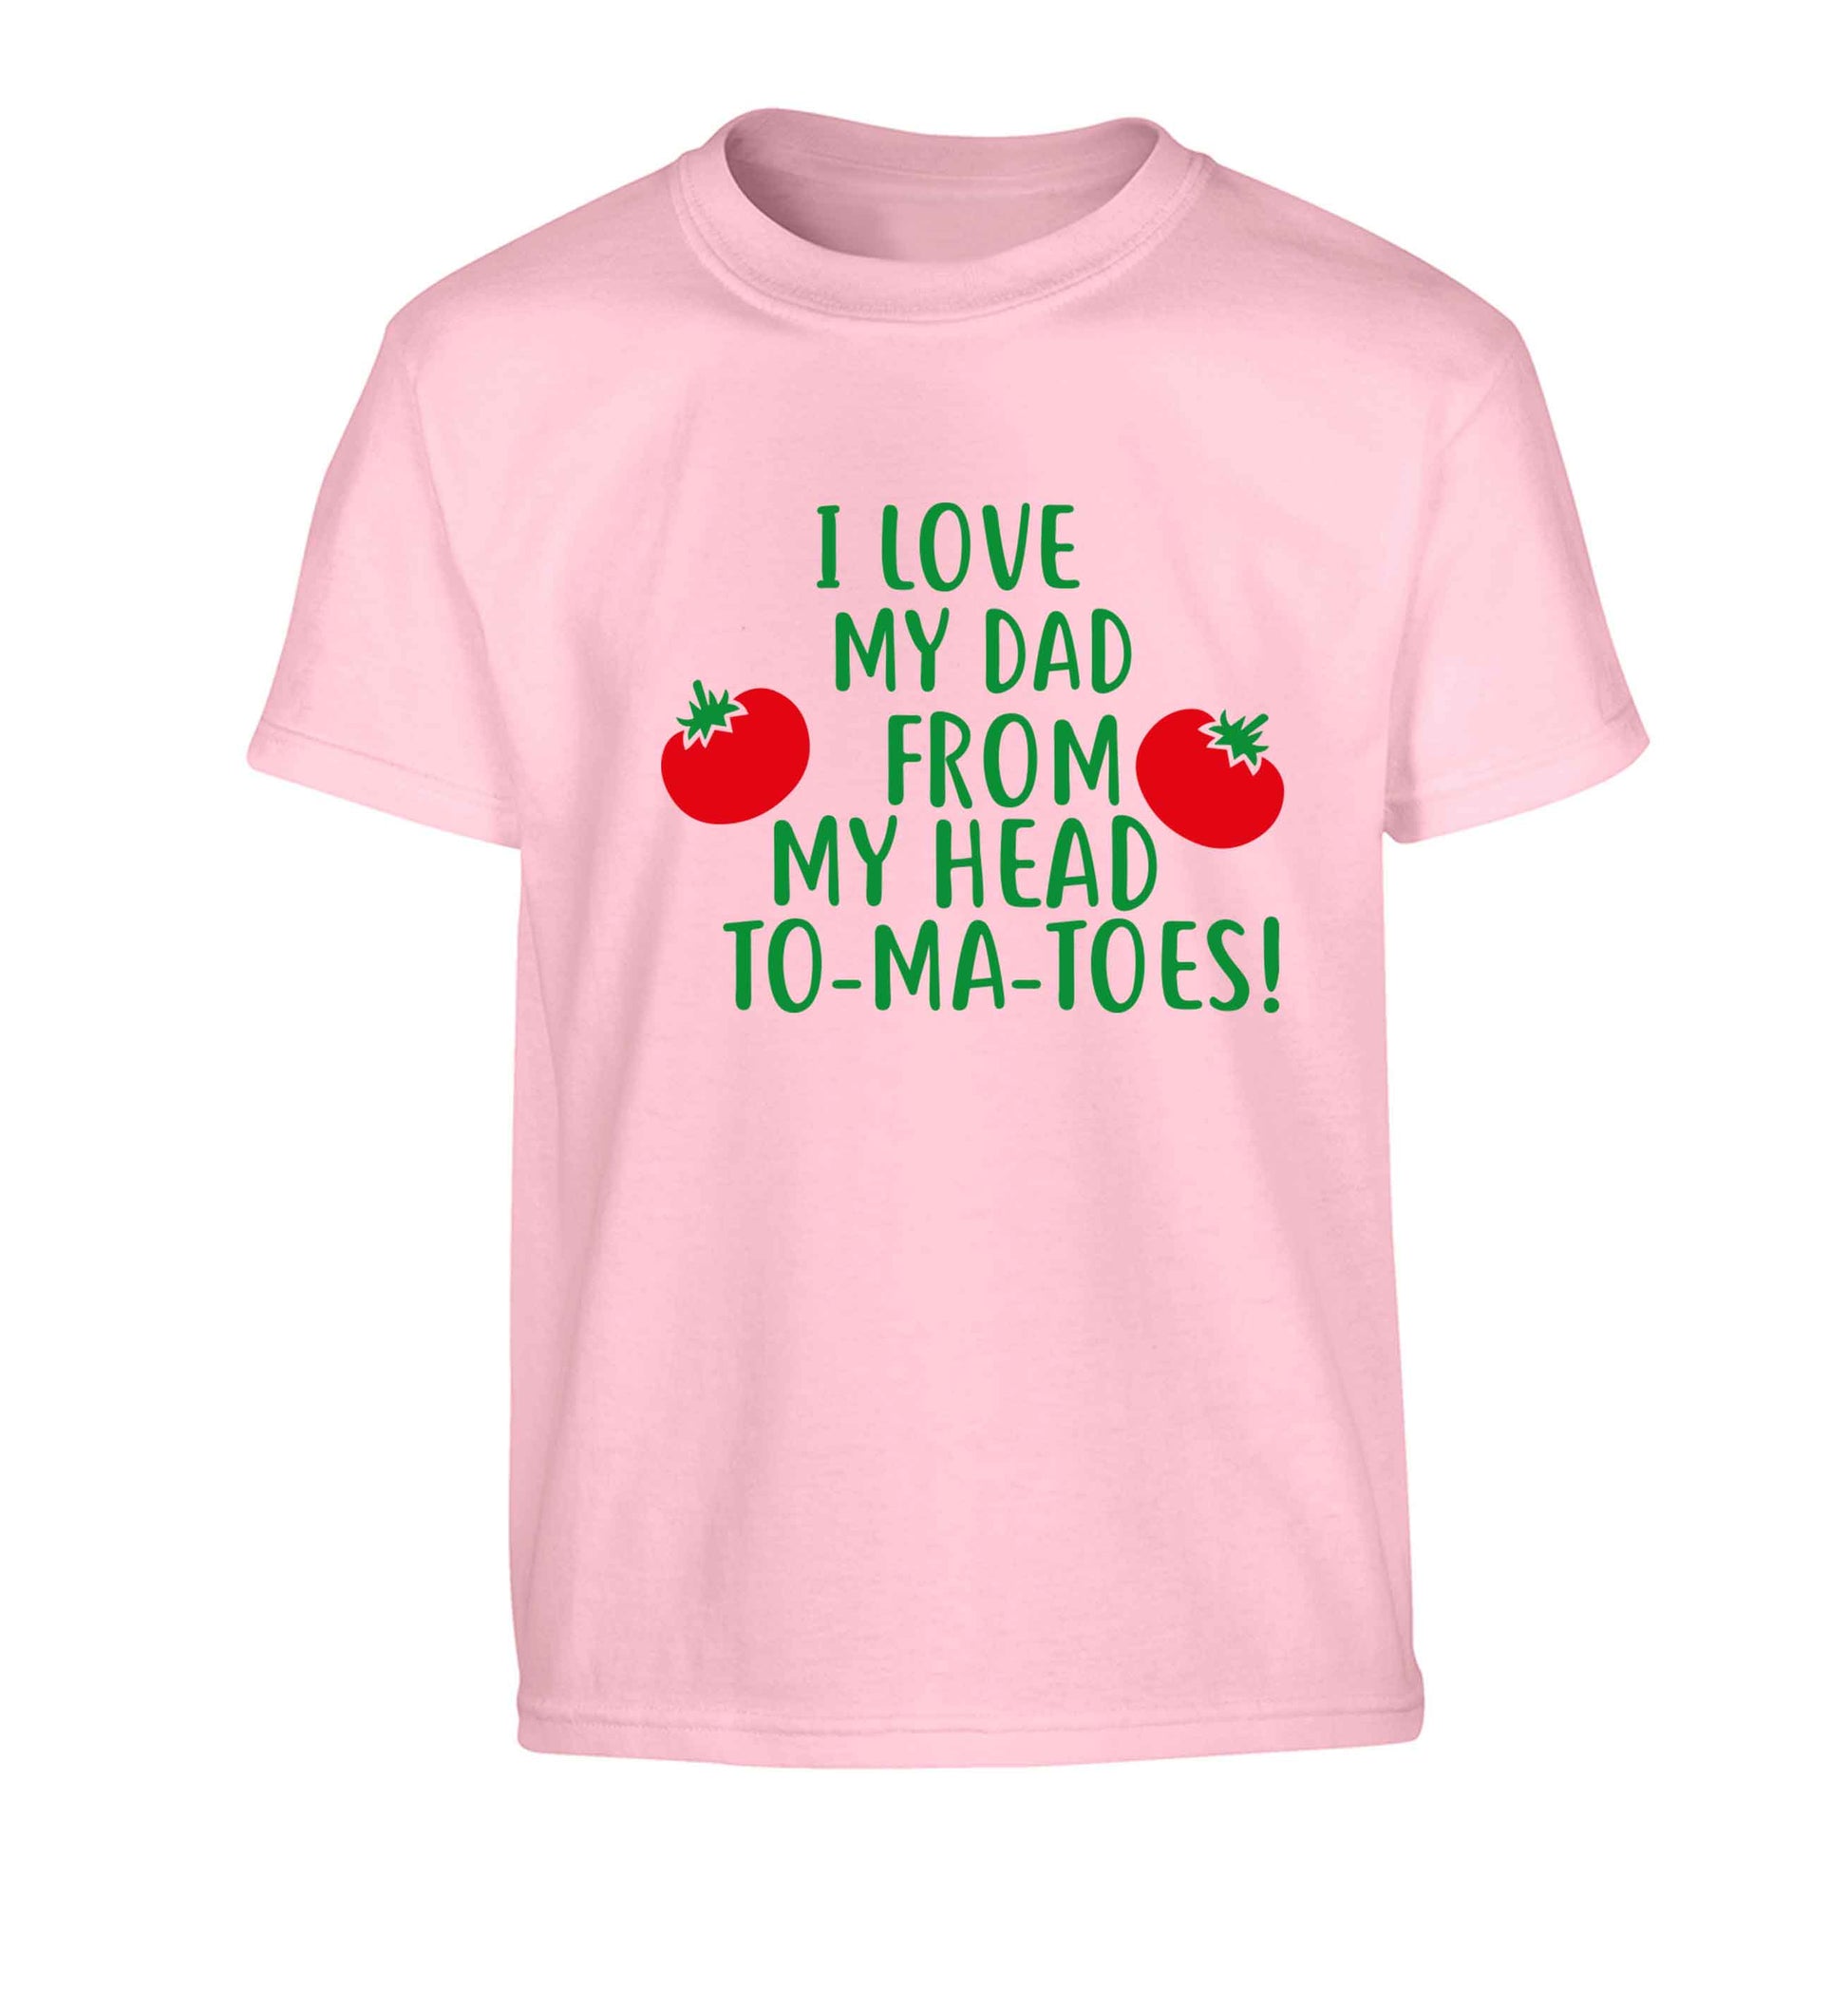 I love my dad from my head to-ma-toes Children's light pink Tshirt 12-13 Years